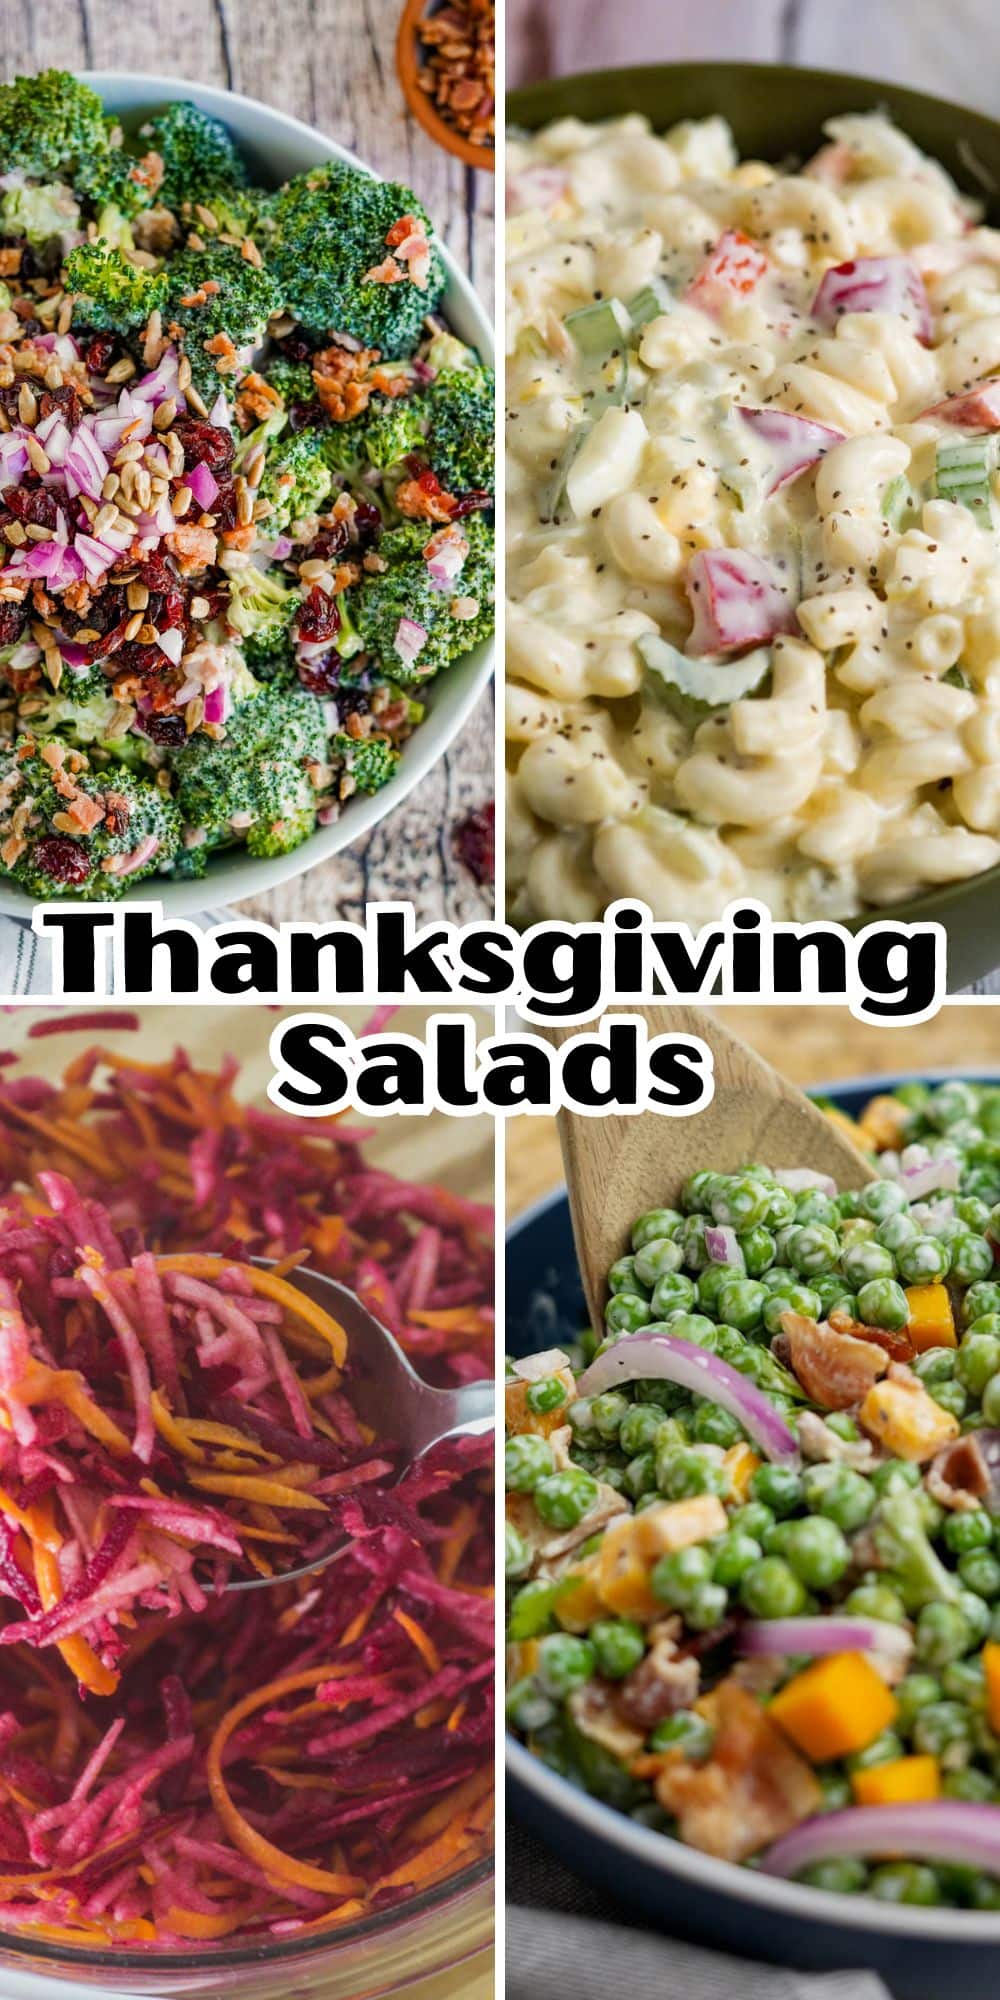 Thanksgiving salads showcased in a vibrant collage of images.